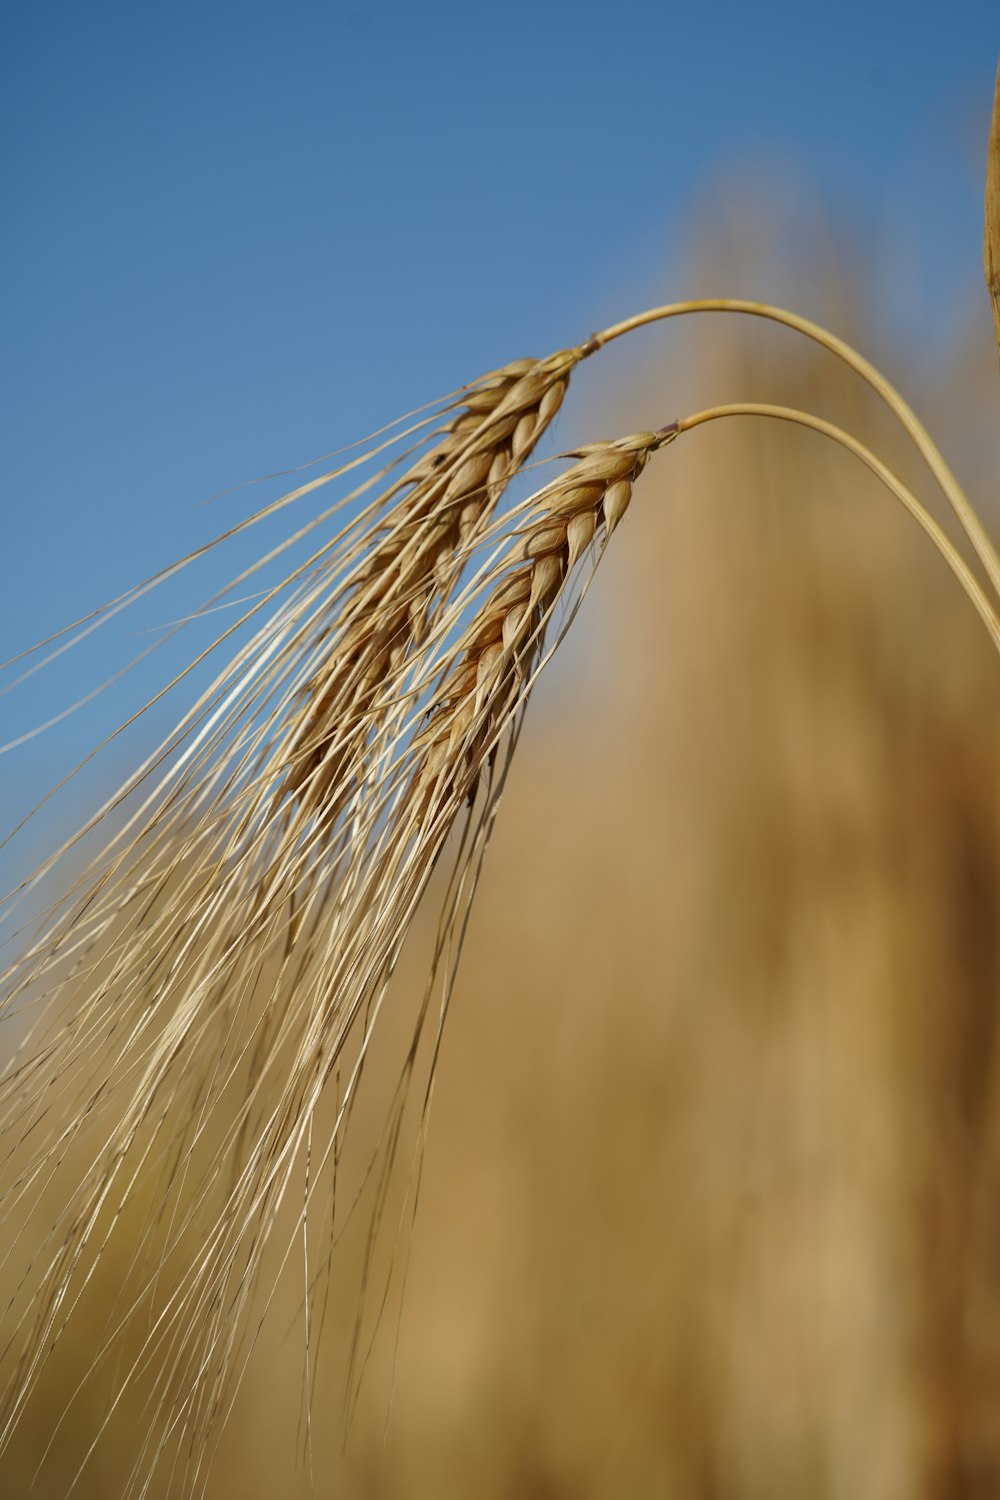 a close up of a wheat plant with a blue sky in the background